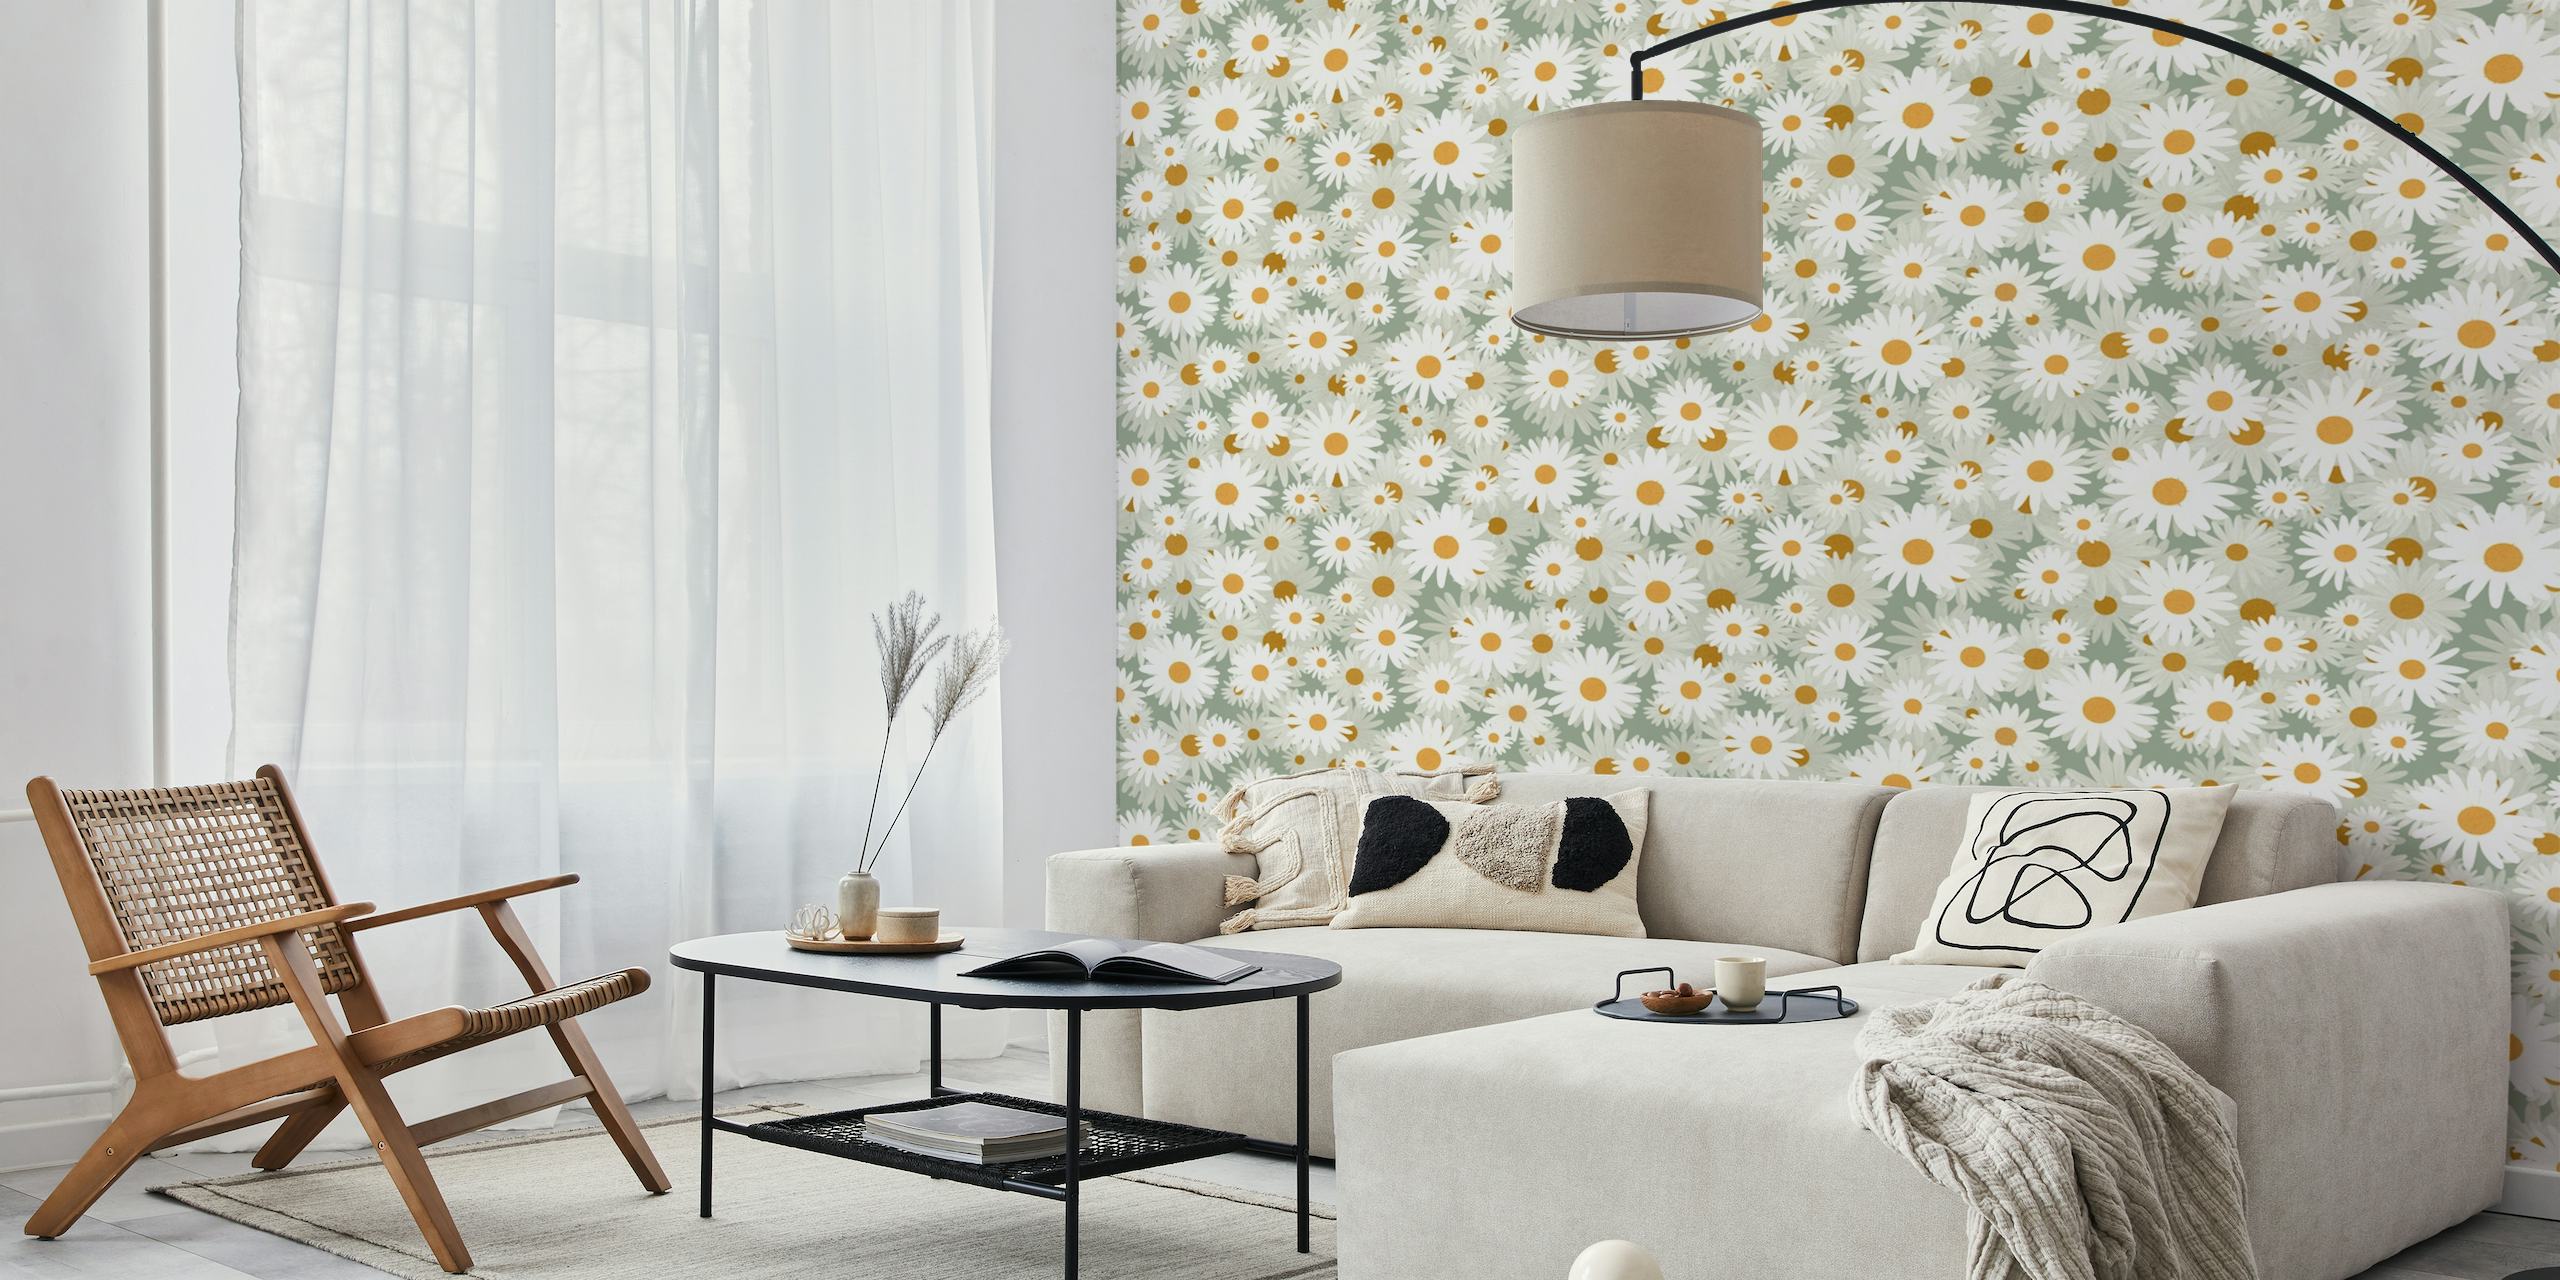 Endless field of white daisies with yellow centers wall mural